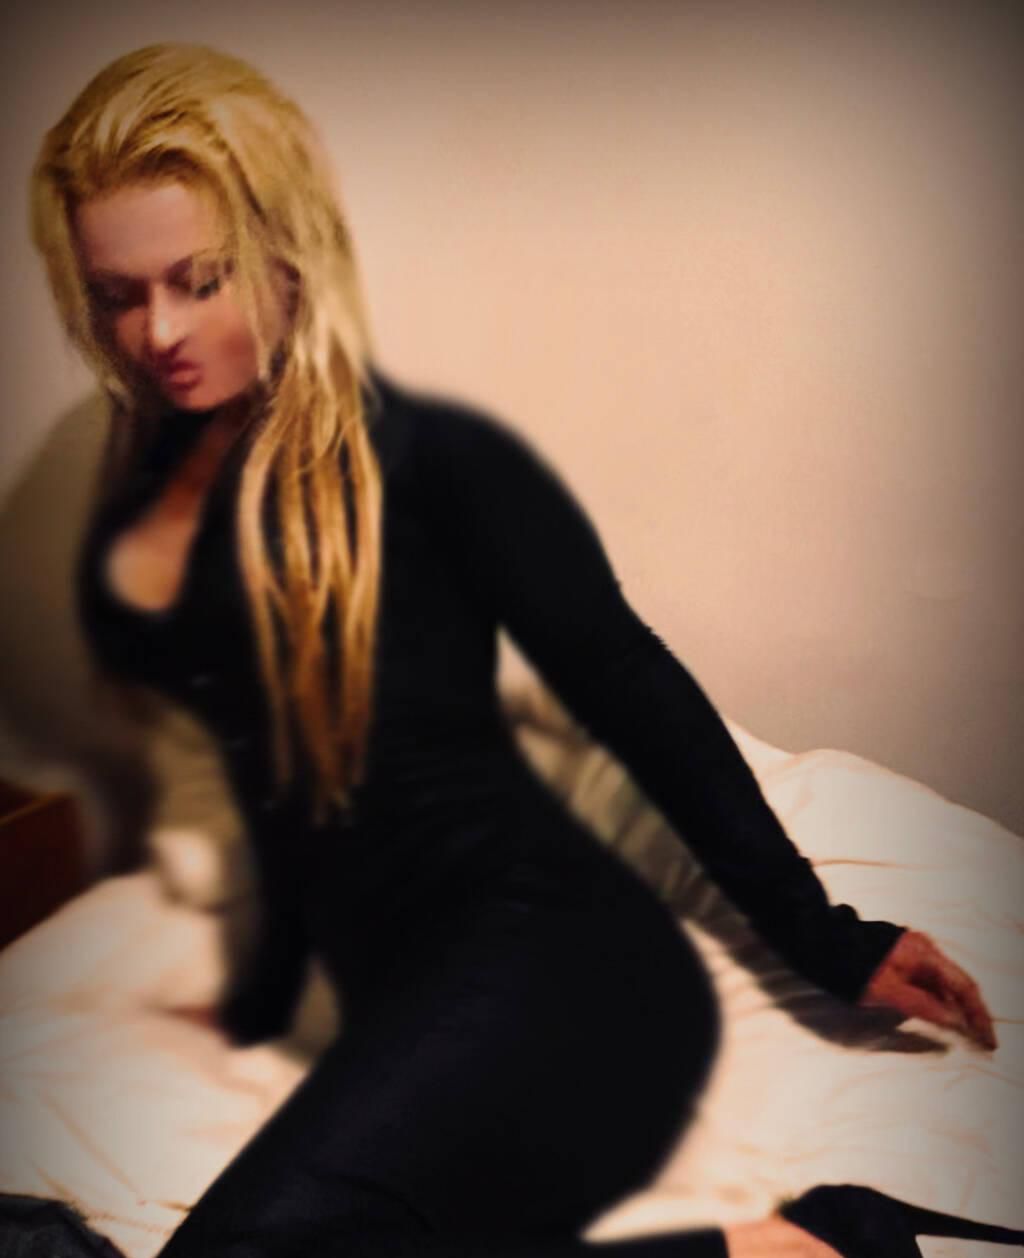 Escorts Montreal, Quebec JennyDowntown in/outcall